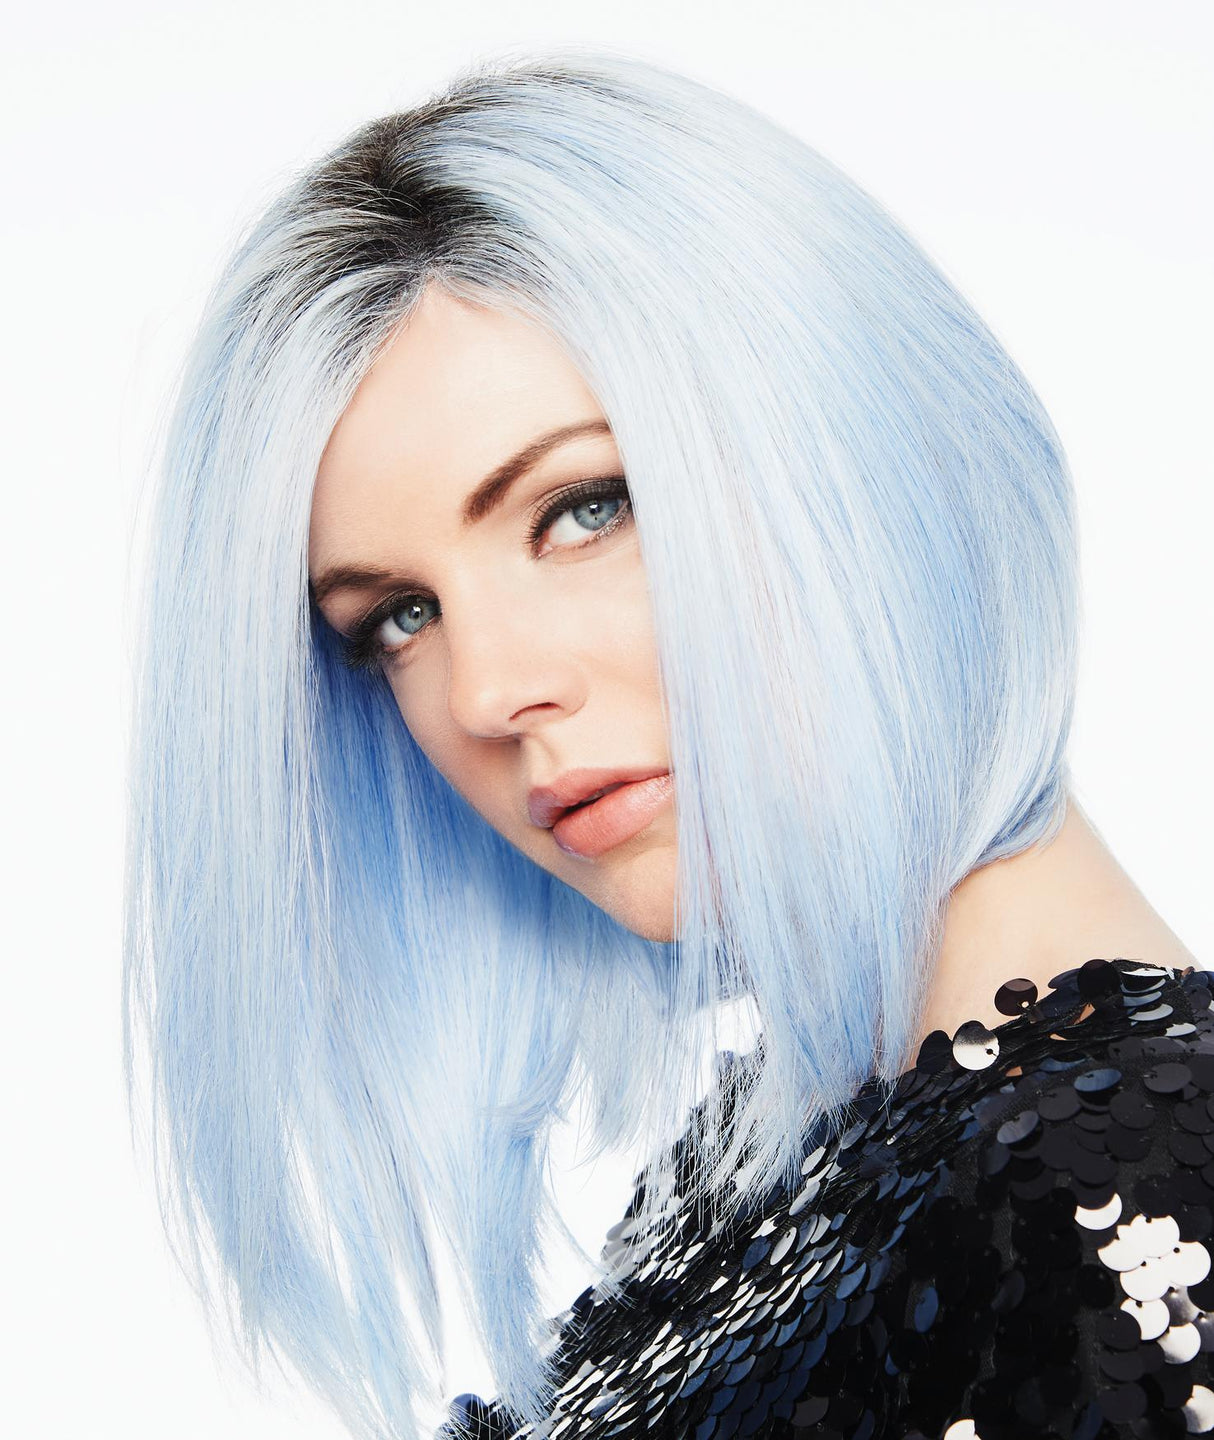 Out of the Blue - Fantasy Wig Collection by Hairdo